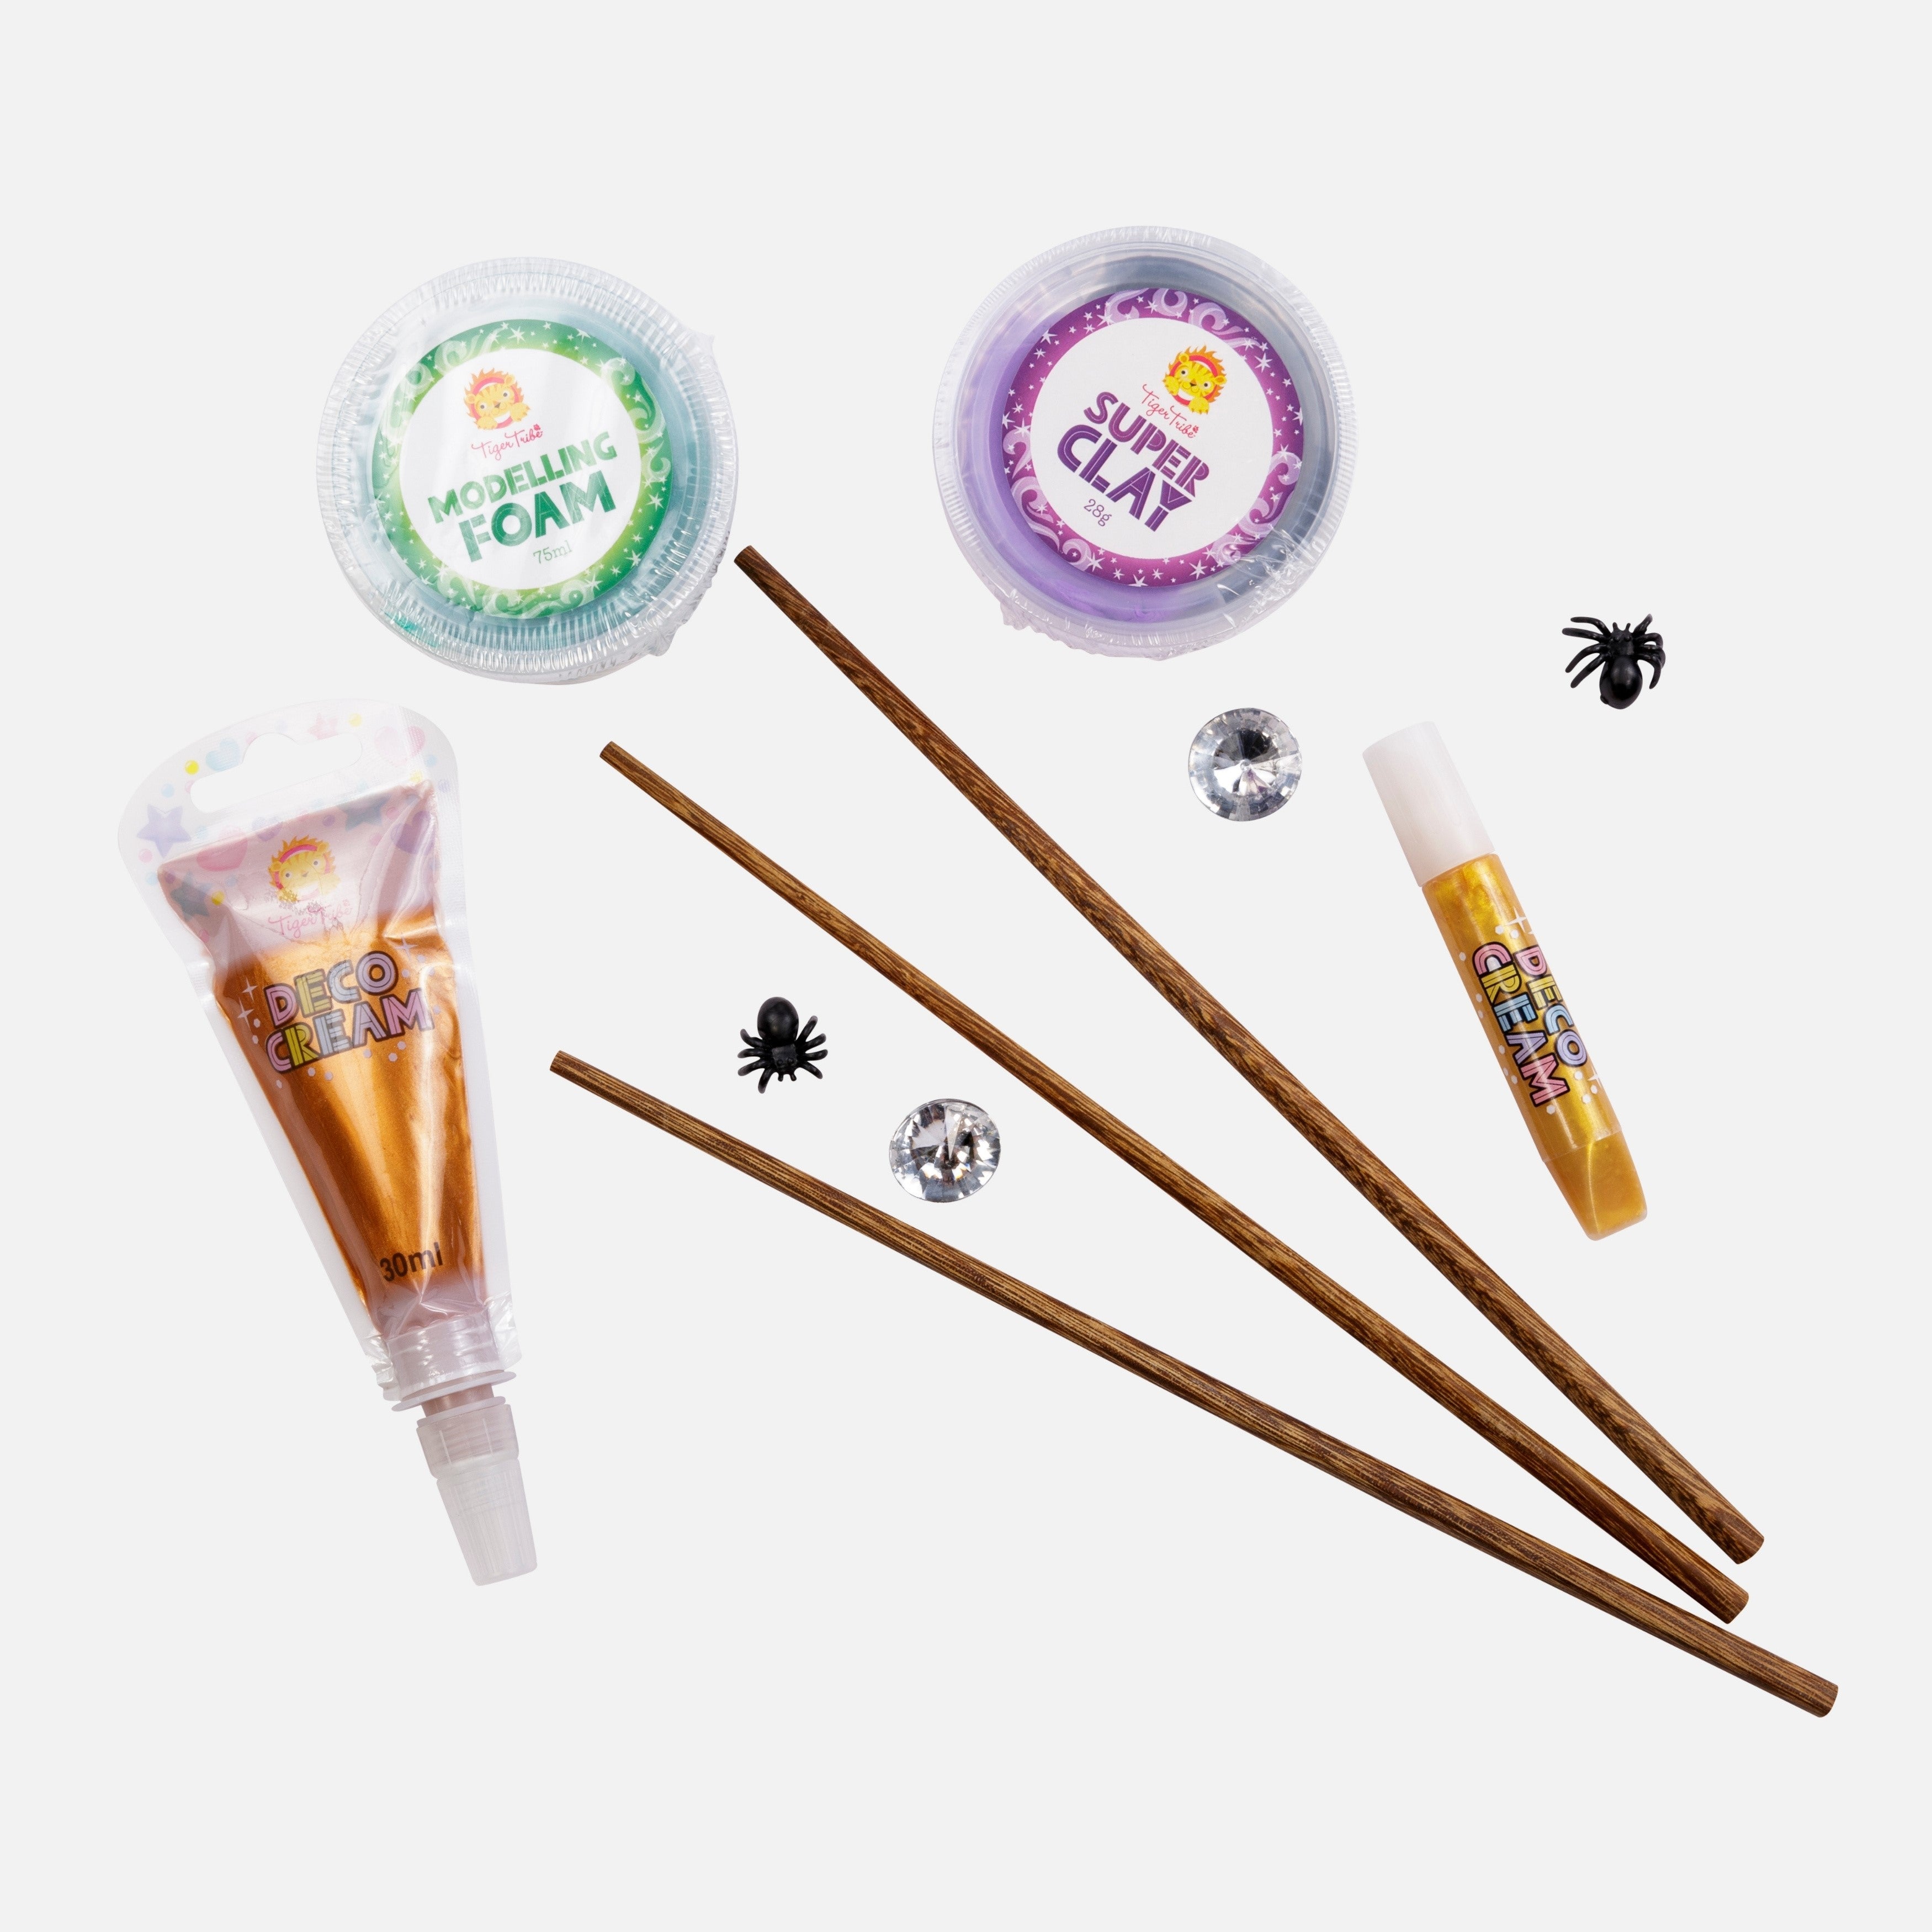 Tiger Tribe | Magic Wand Kit - Spellbound